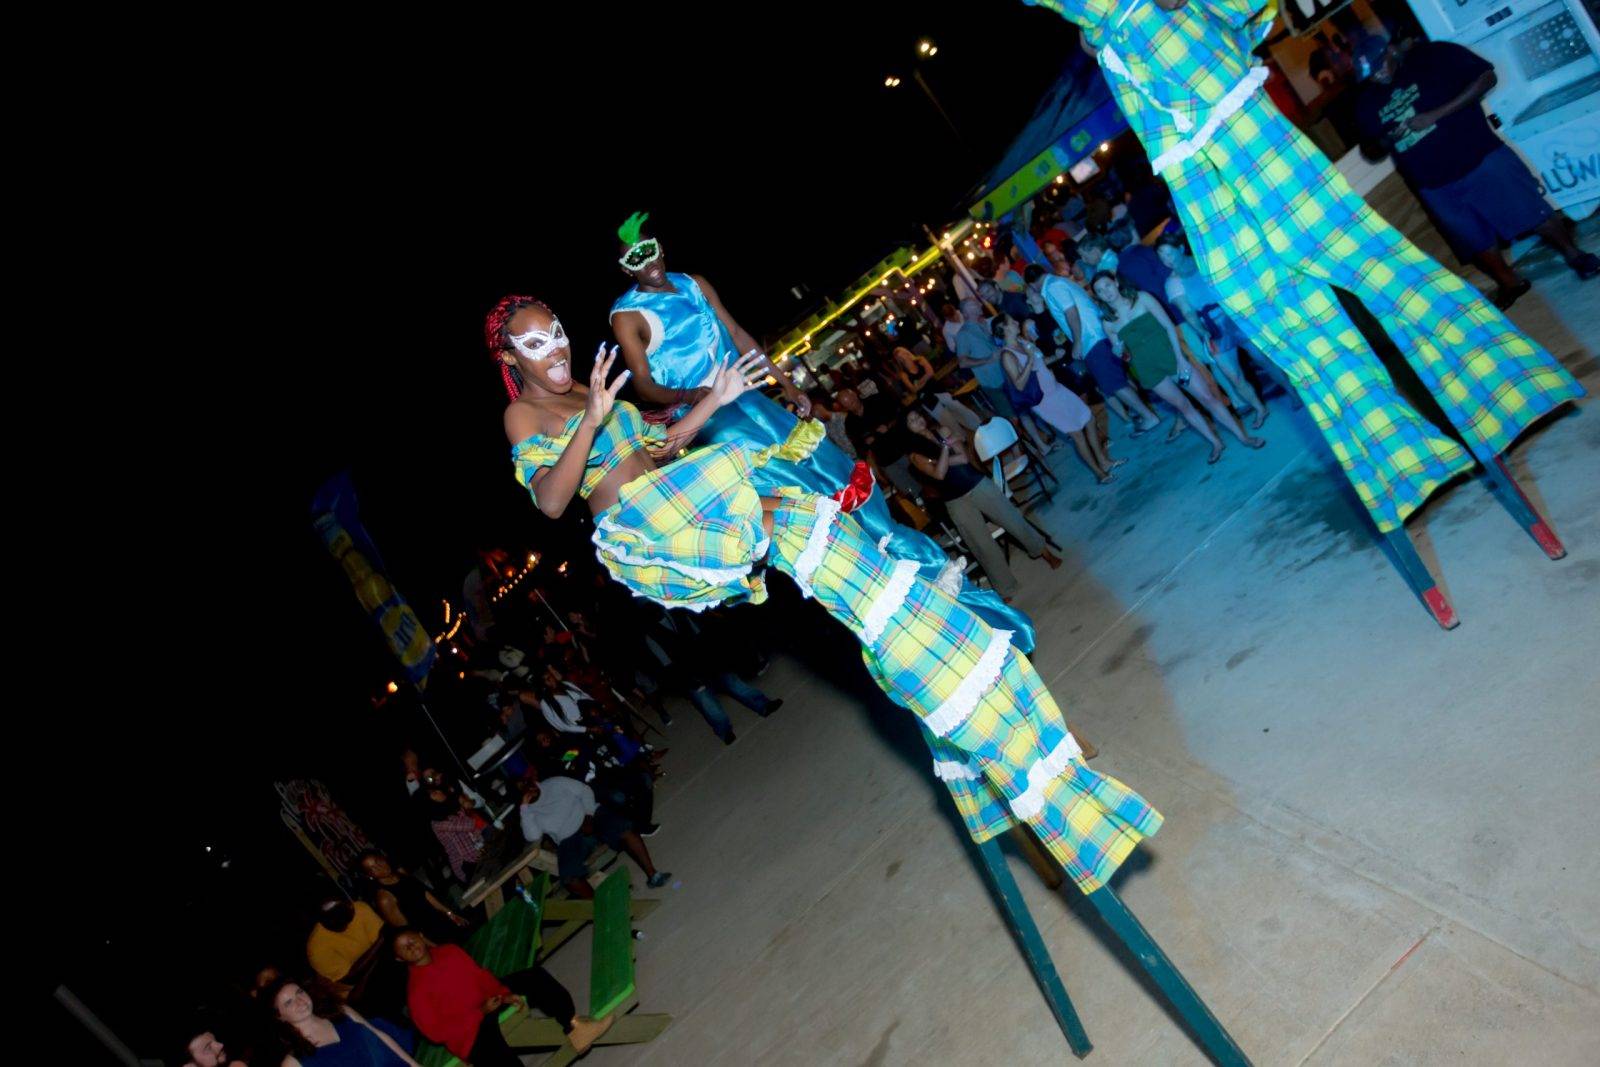 One of the stilts performers in her blue and yellow apparel